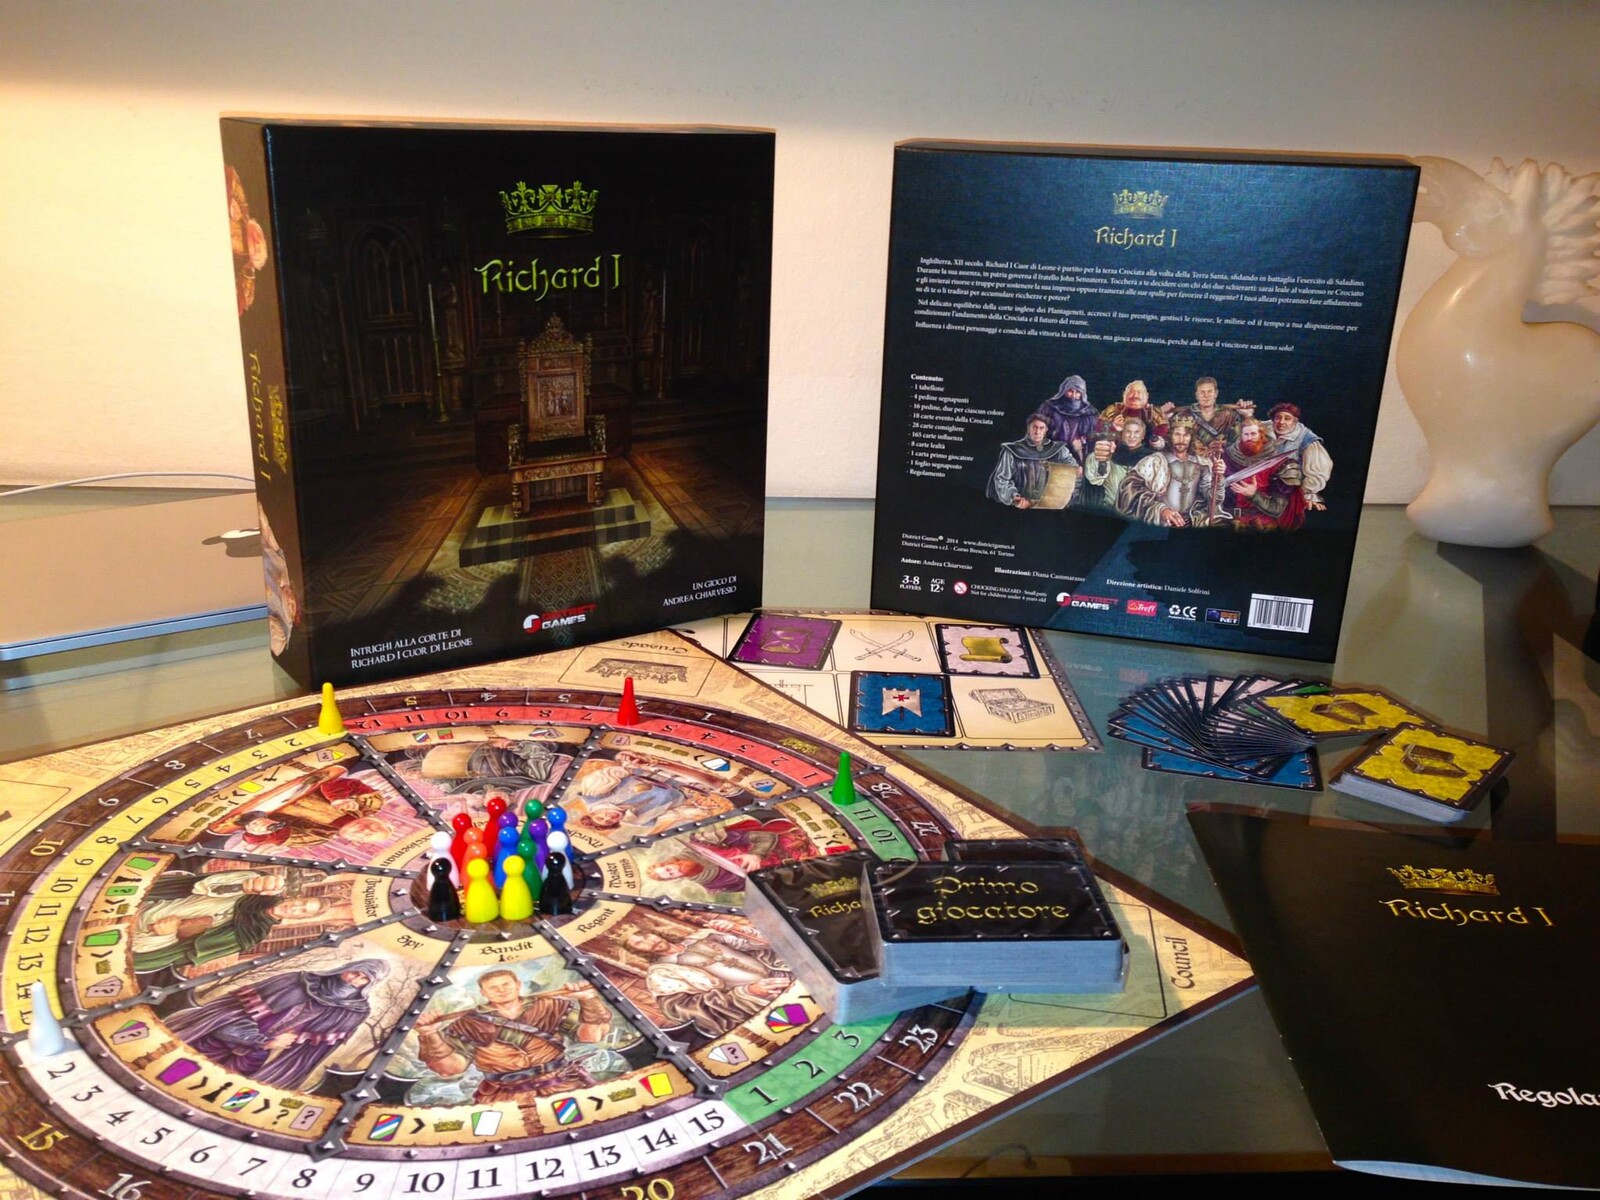 Overview of the Box and game elements